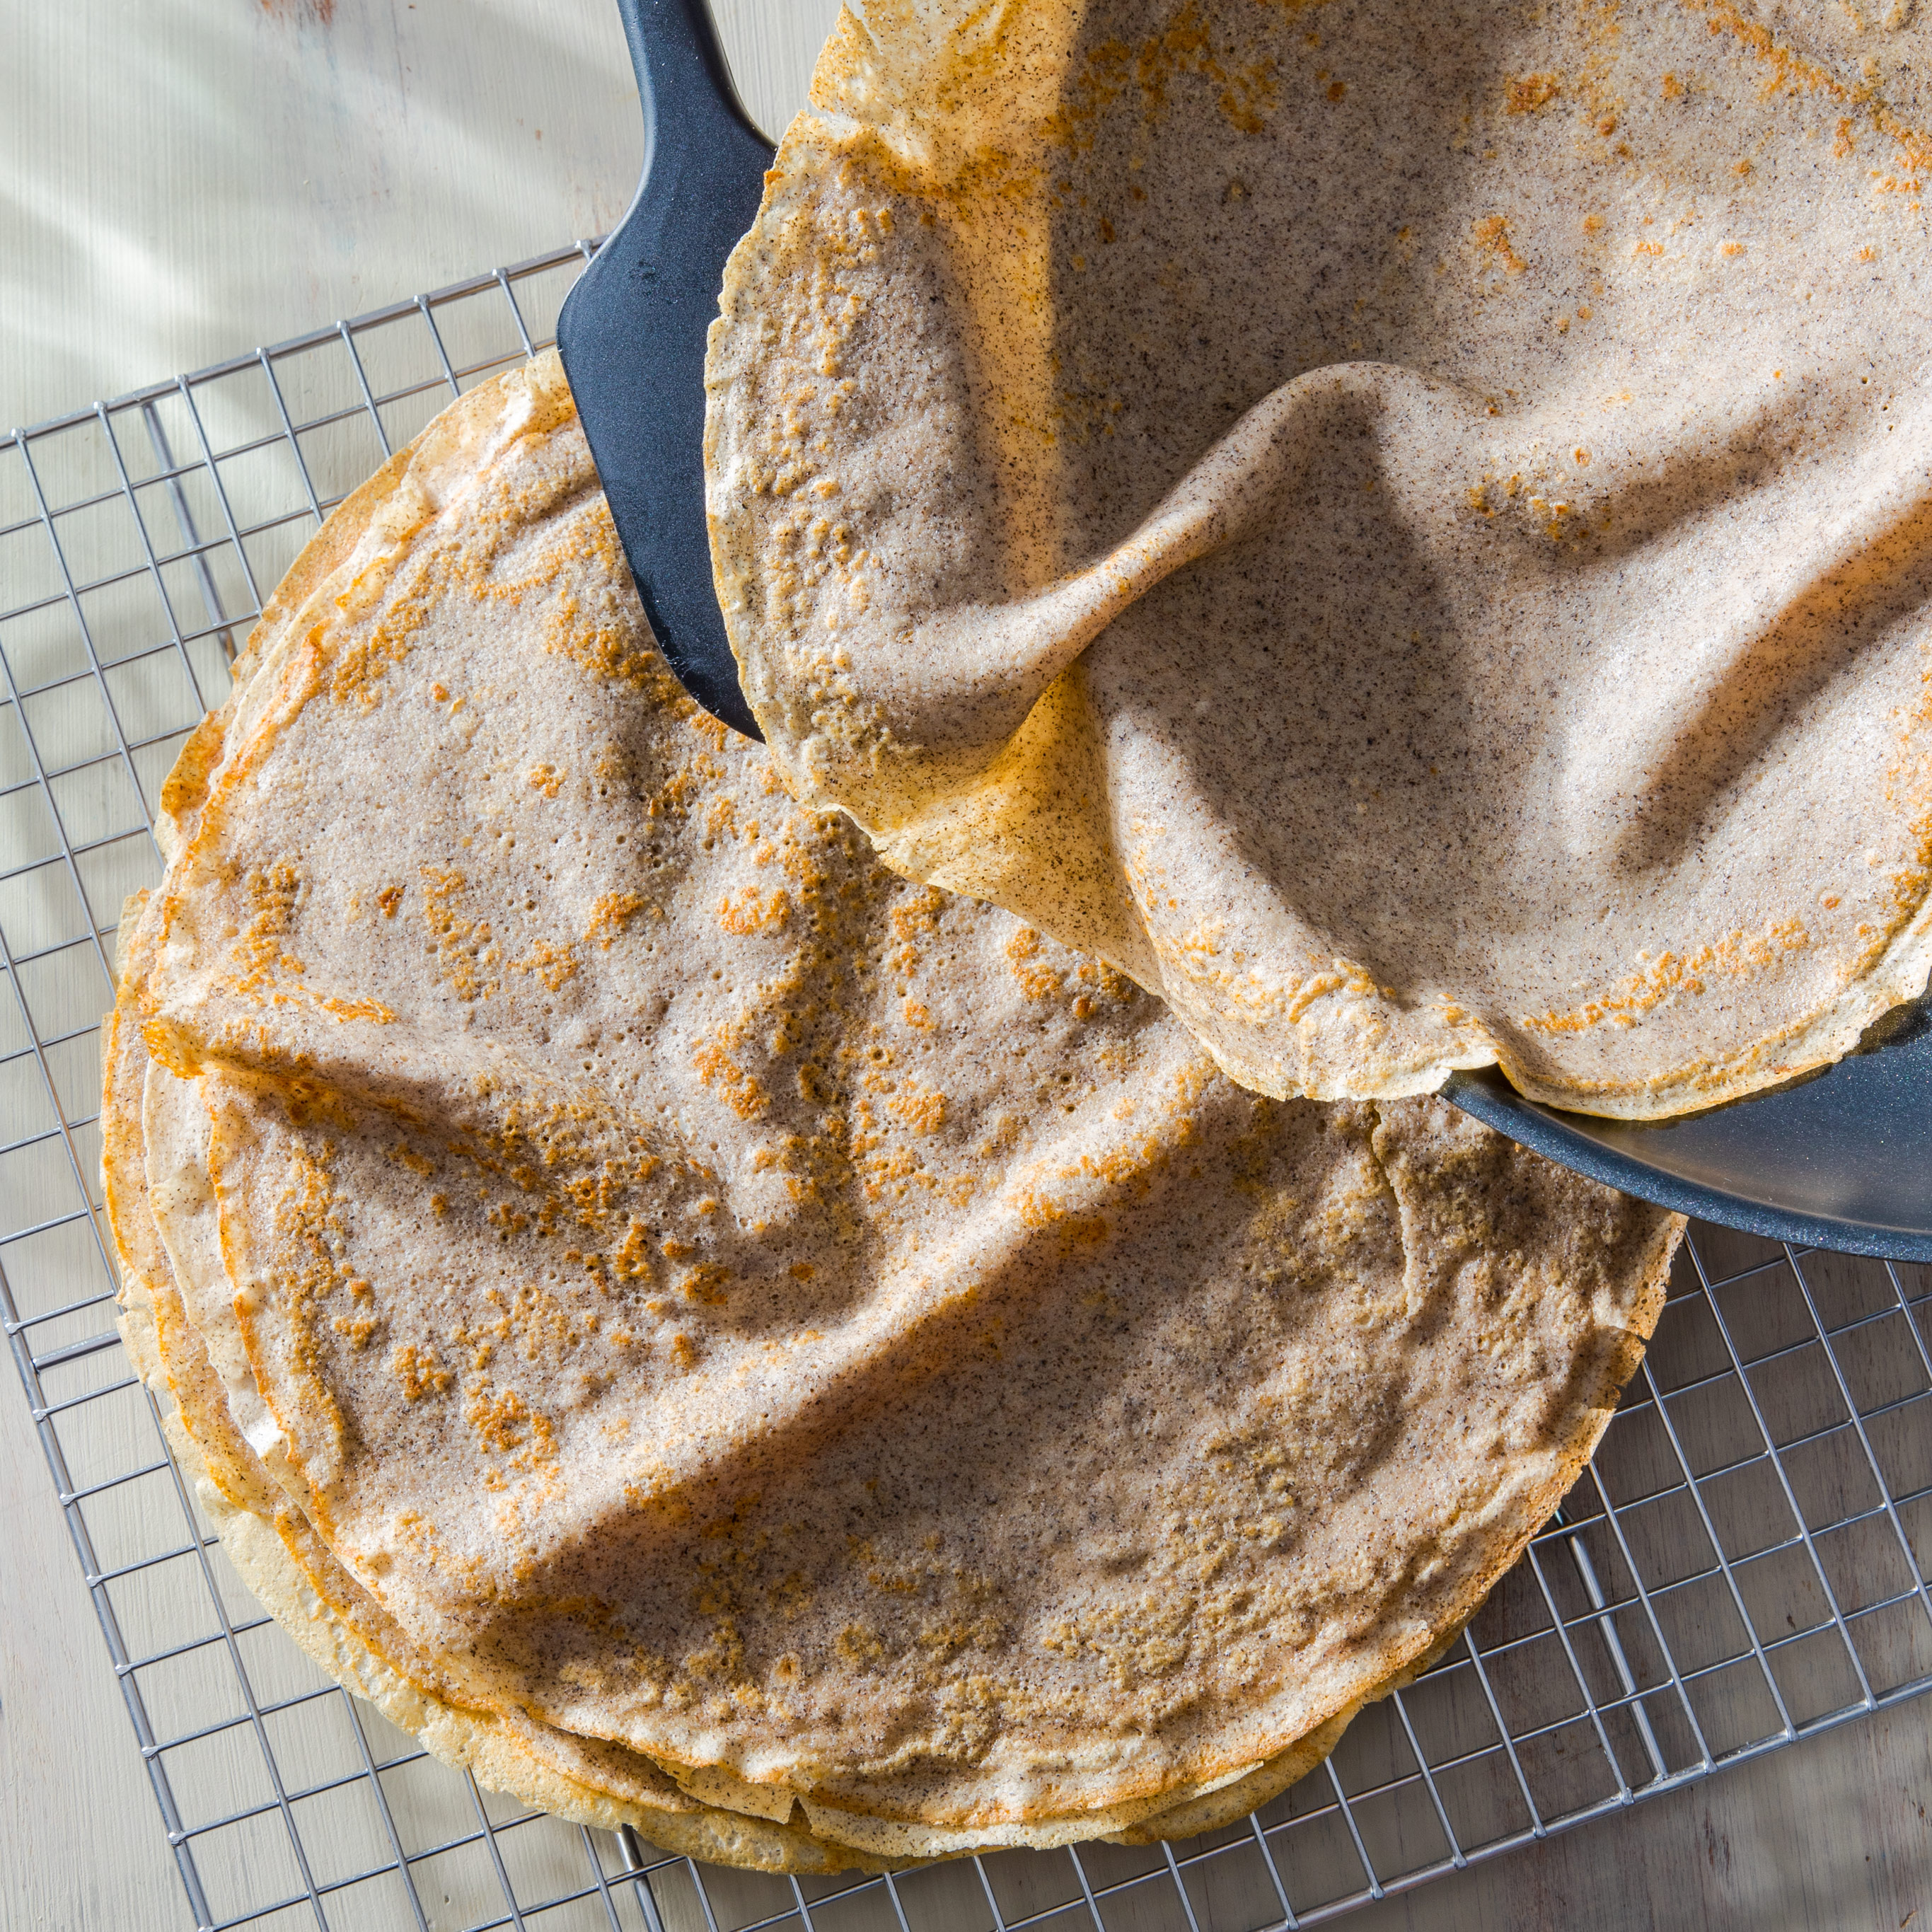 Galettes Complètes (Buckwheat Crepes) Recipe - NYT Cooking